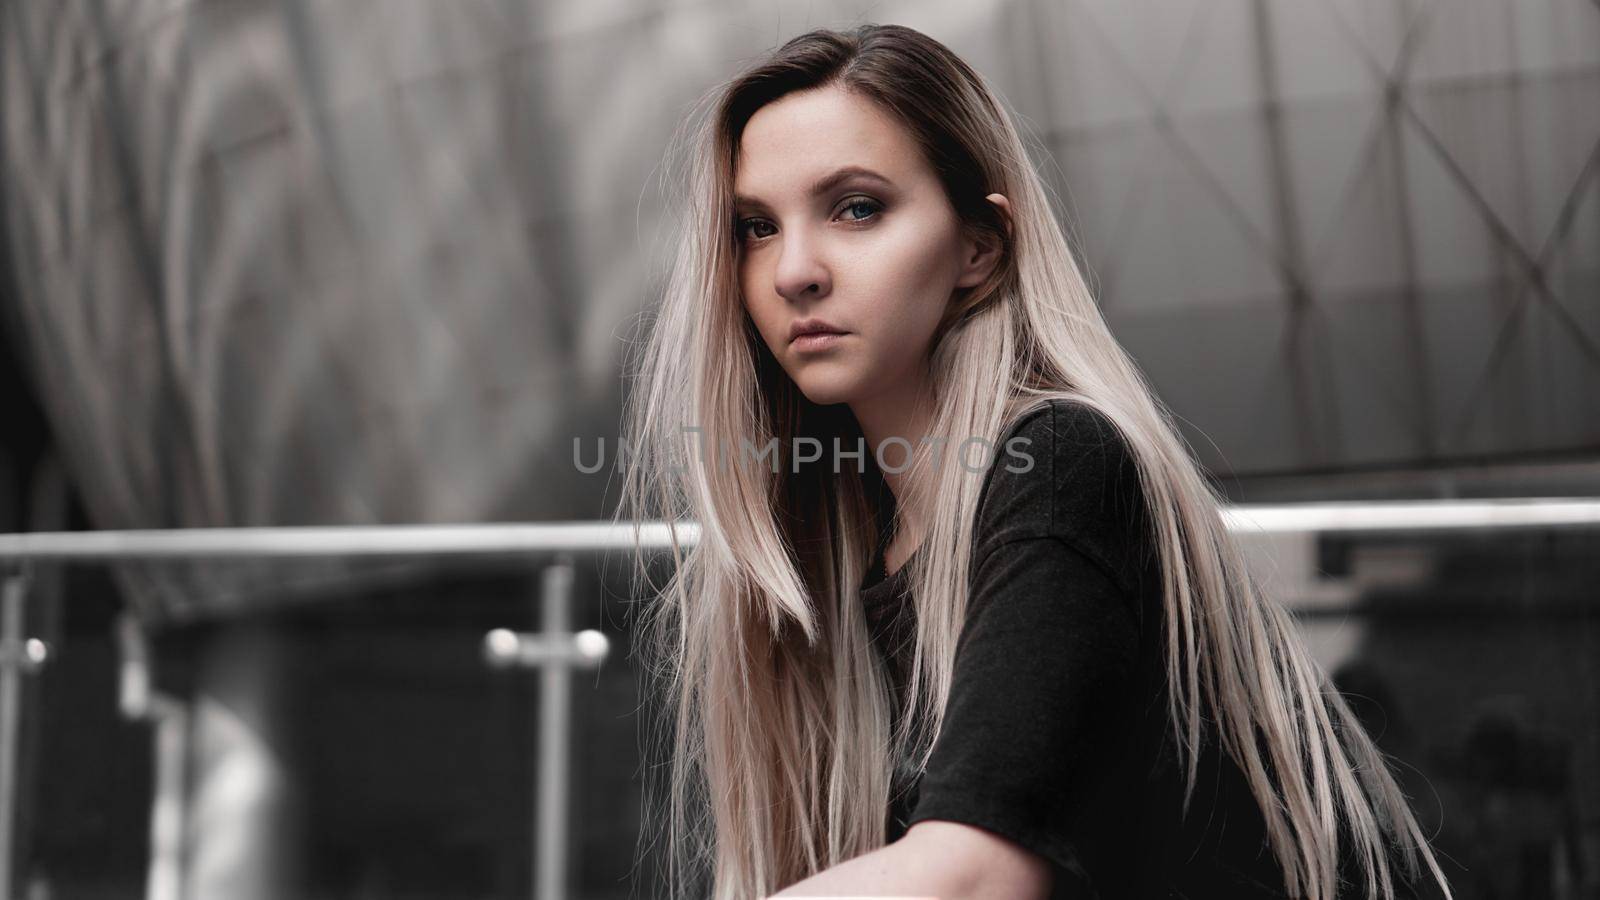 Urban style blonde girl with a stern look. Girl power and subculture concept. by natali_brill